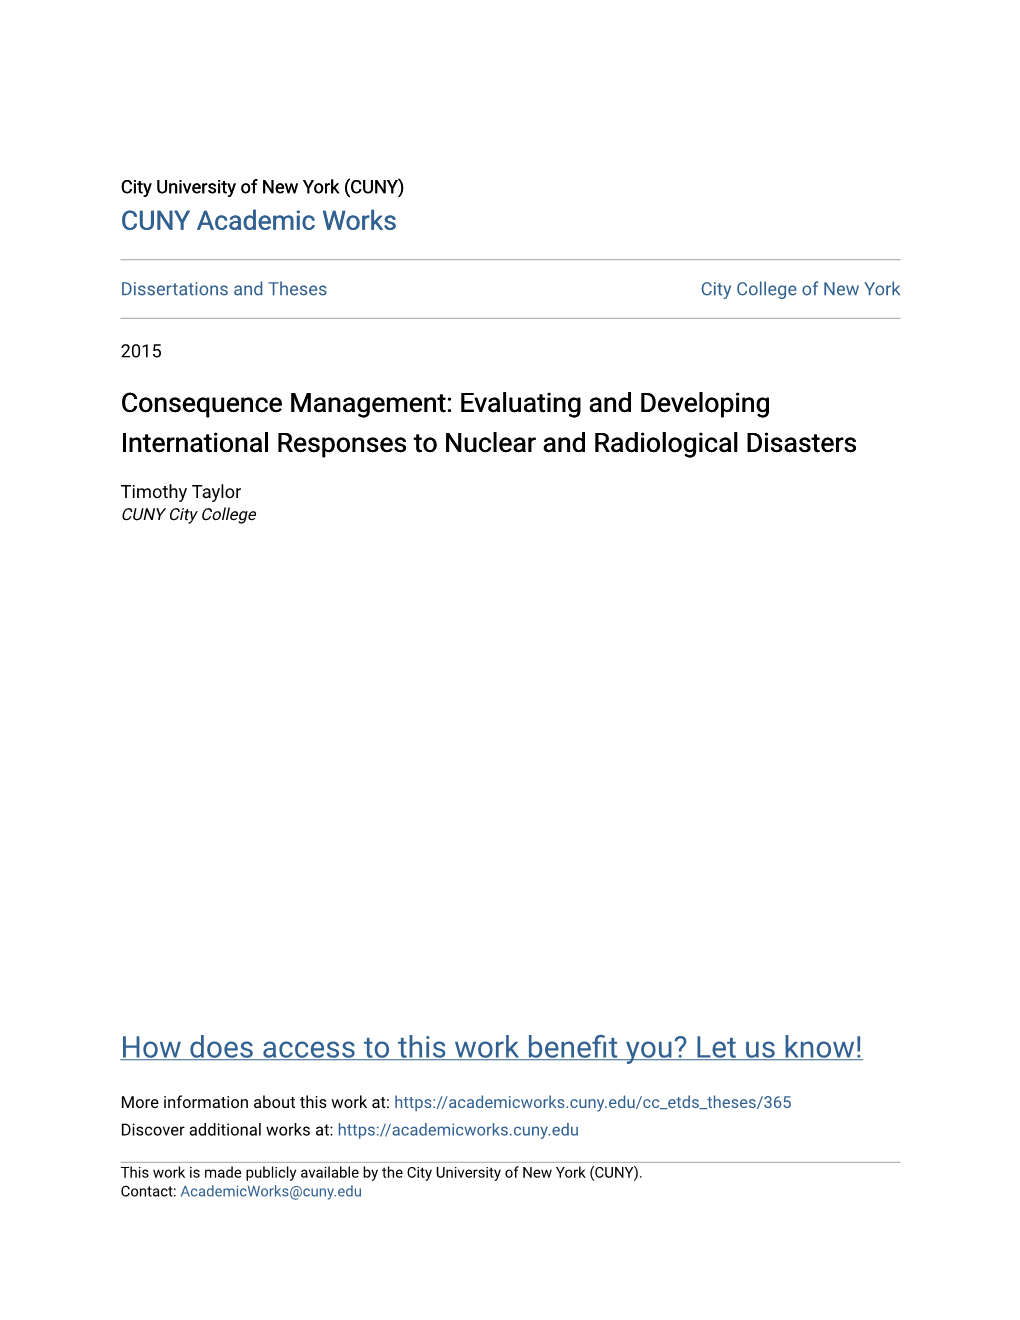 Consequence Management: Evaluating and Developing International Responses to Nuclear and Radiological Disasters